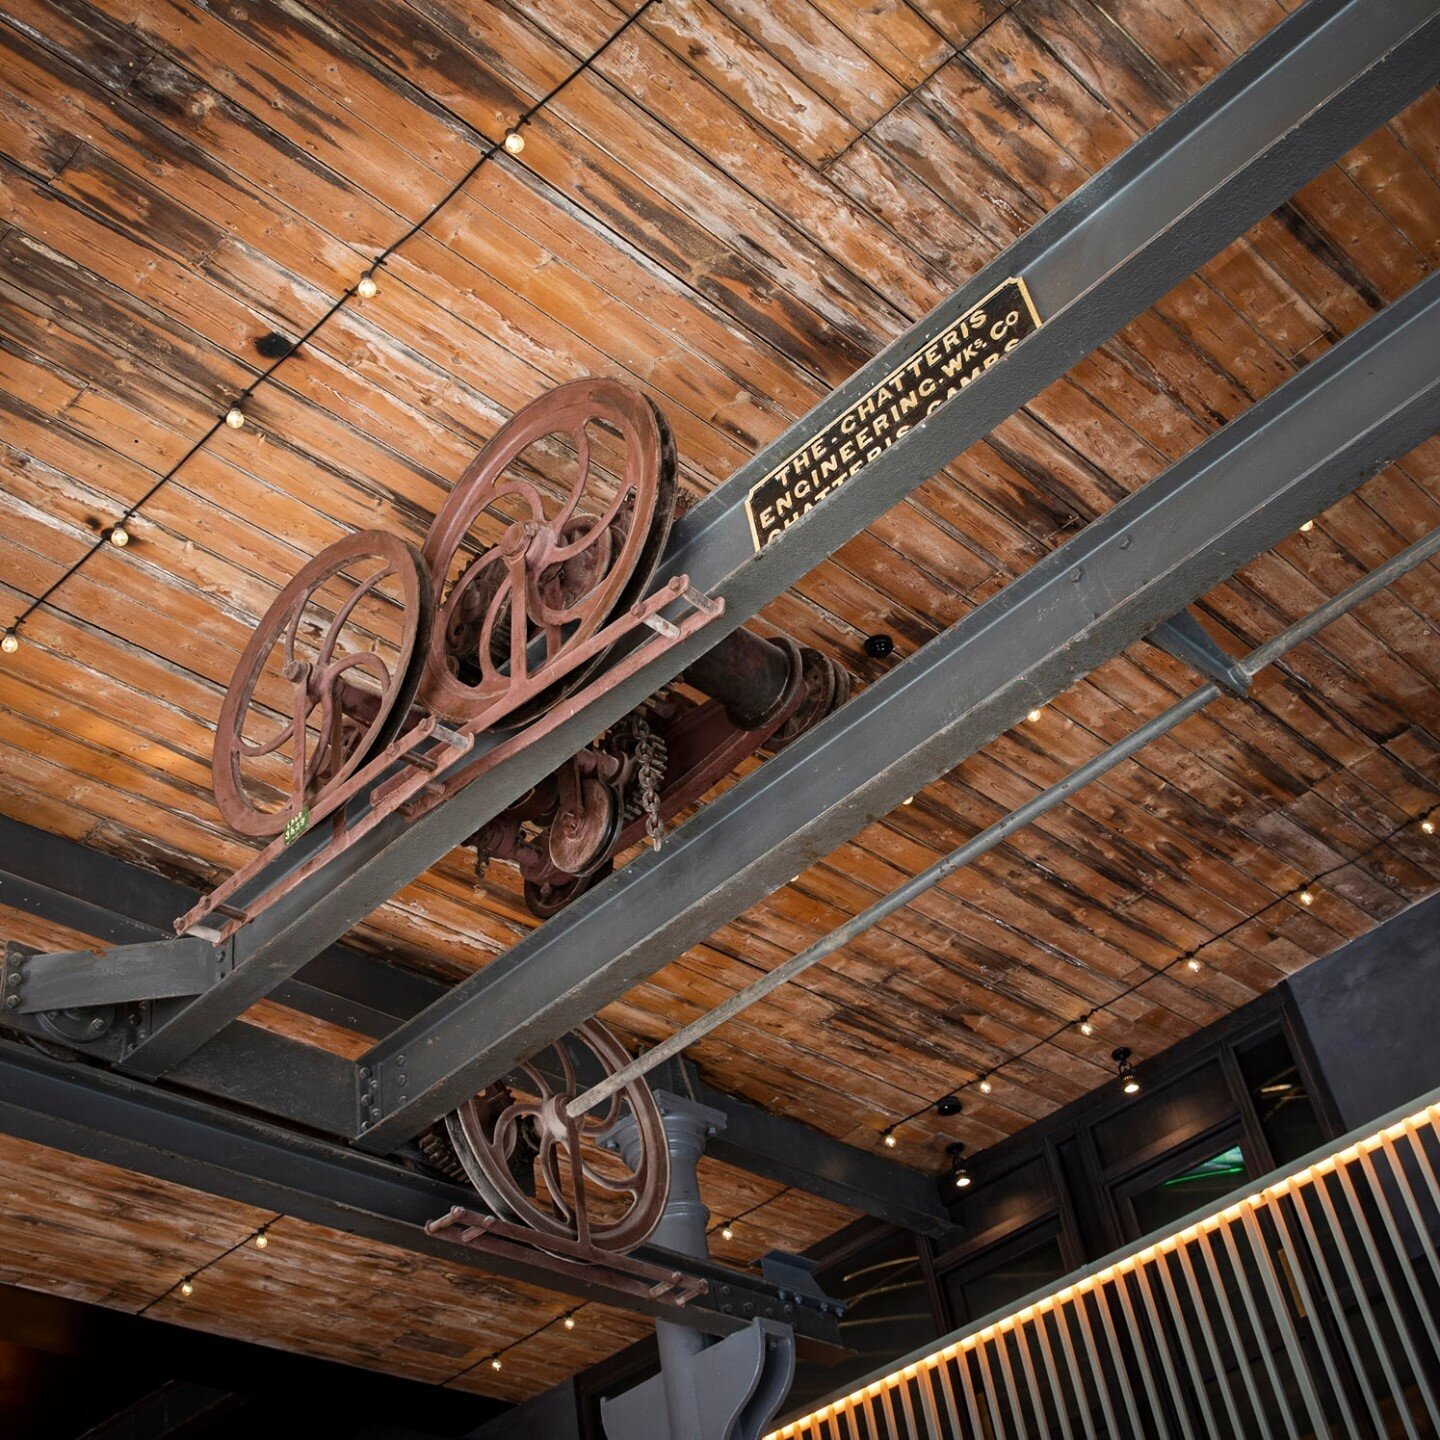 DID YOU LOOK UP? 👆⁠
⁠
Back in 1900's our landmark building was a power station. Some of the original features like this steel pulley system have been saved, and are now protected since 2014 thanks to the #savethelight campaign. ⁠
⁠
We're a new crew 